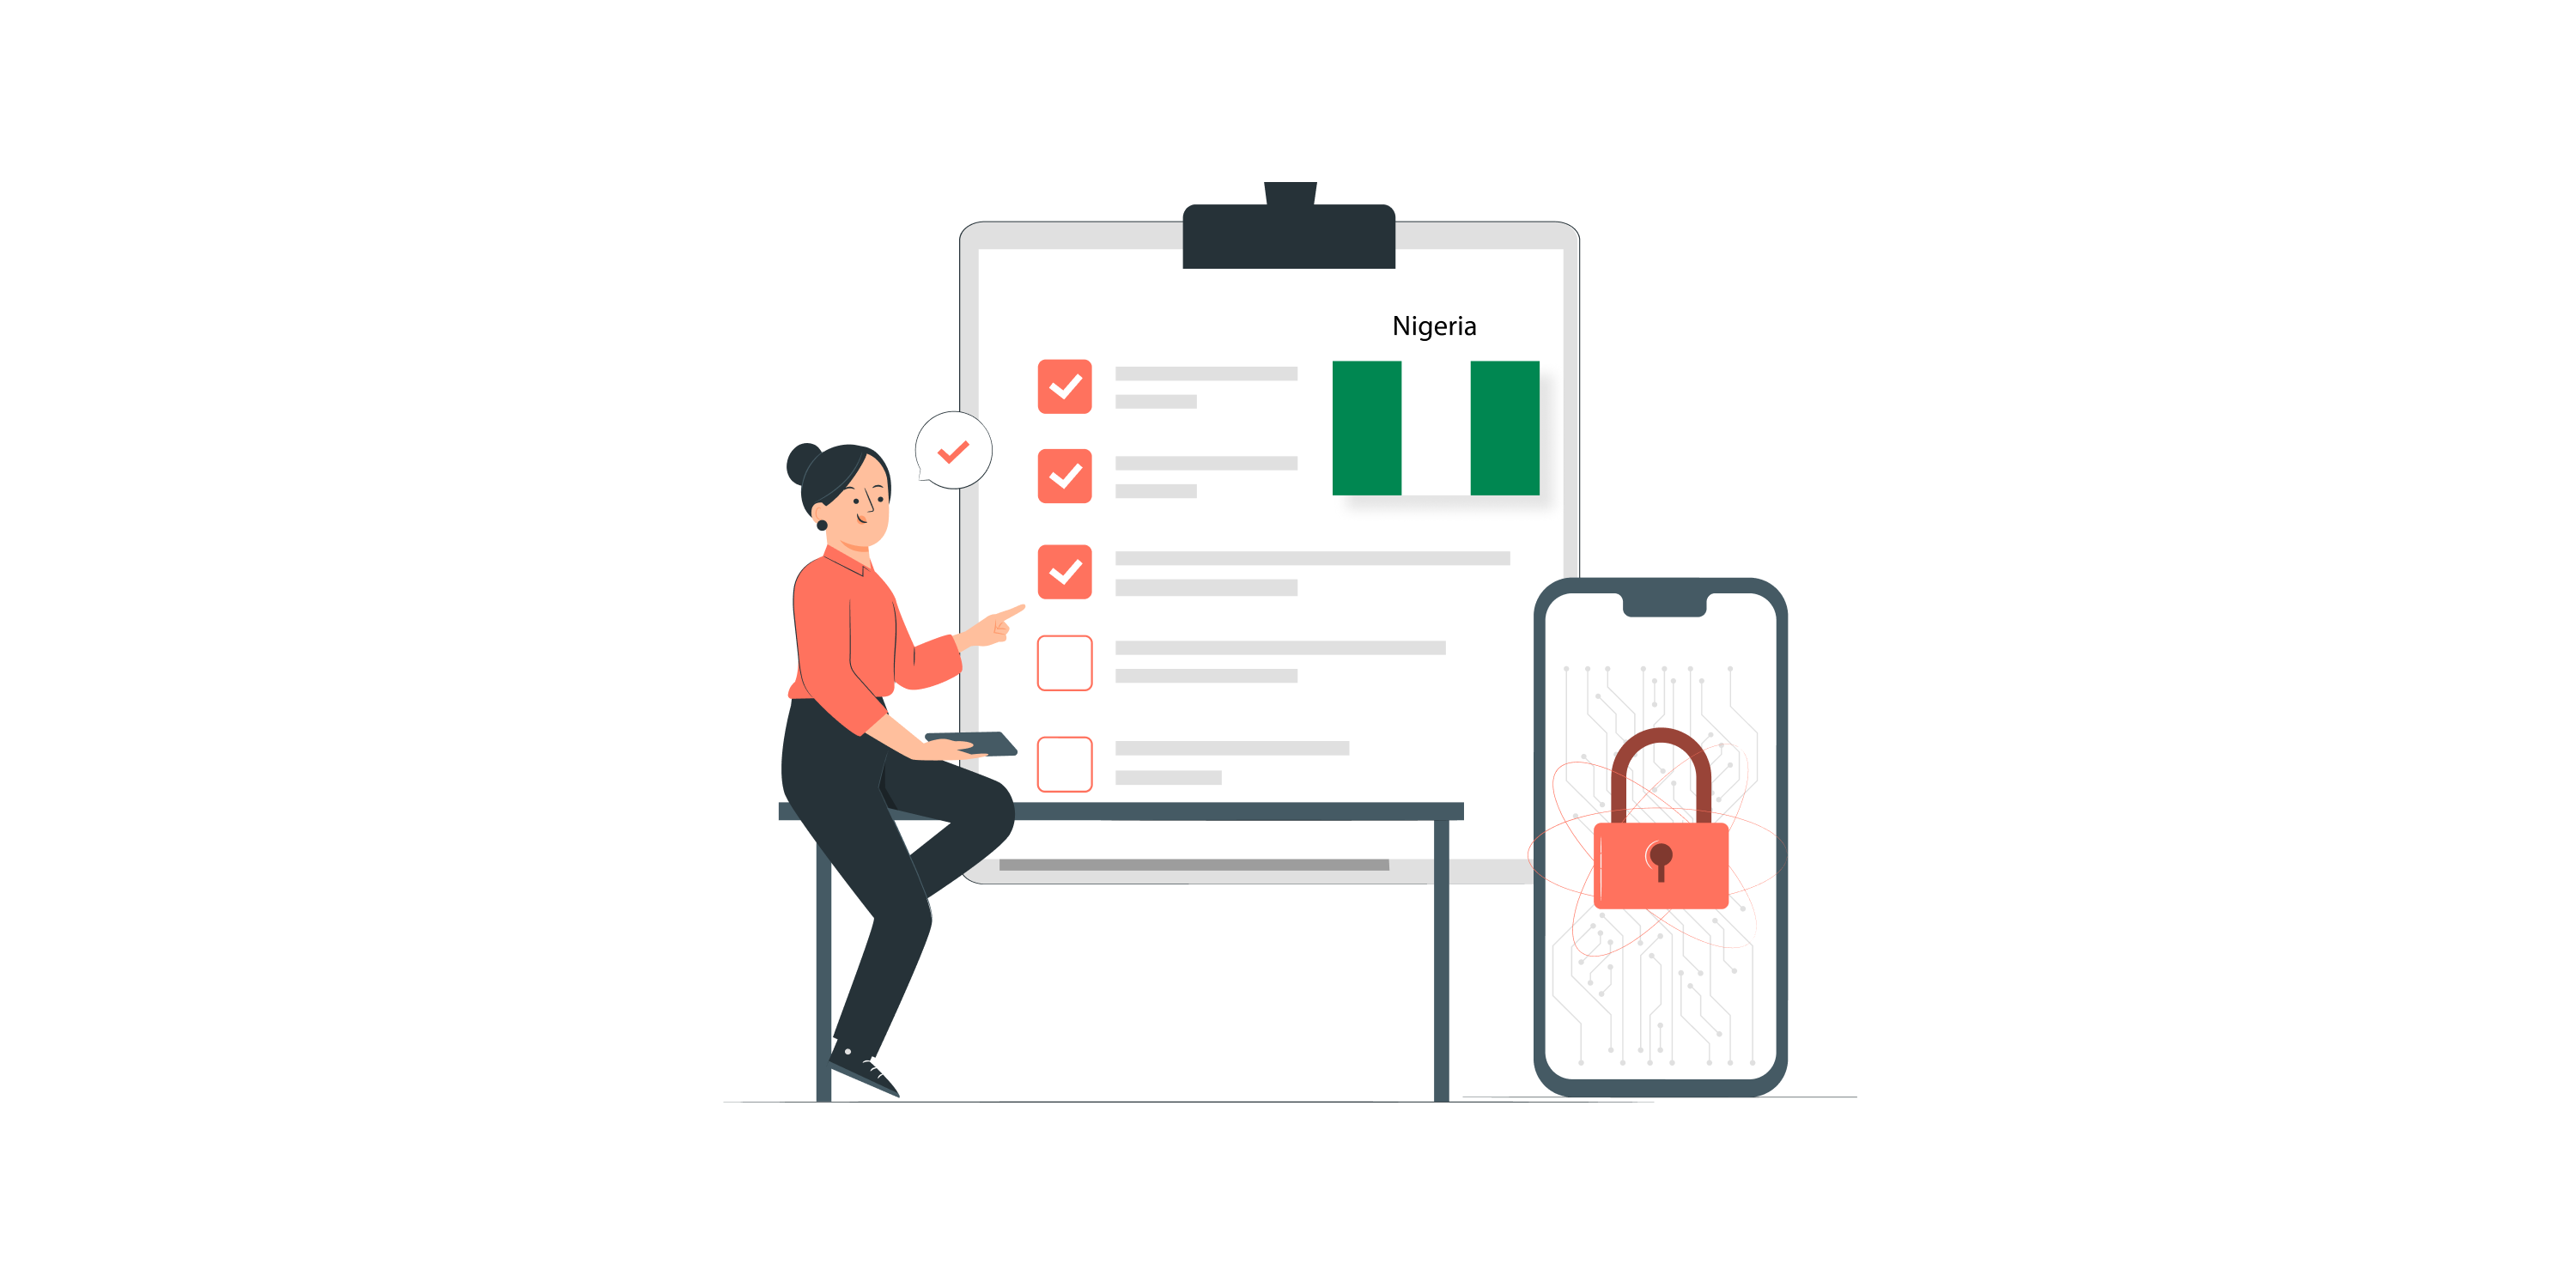 The Ultimate Security Checklist to Launch a Mobile App in Nigeria - iOS & Android